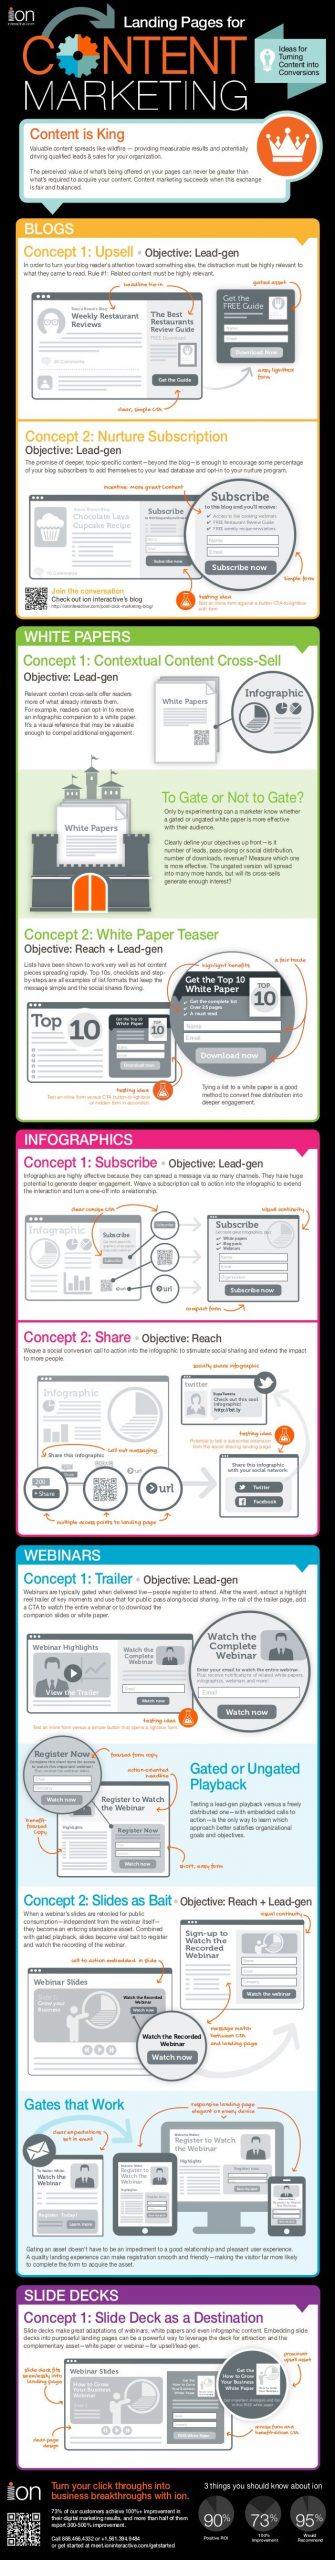 , 10 Ways to Increase Your Content Marketing Conversion Rate [Infographic], TornCRM